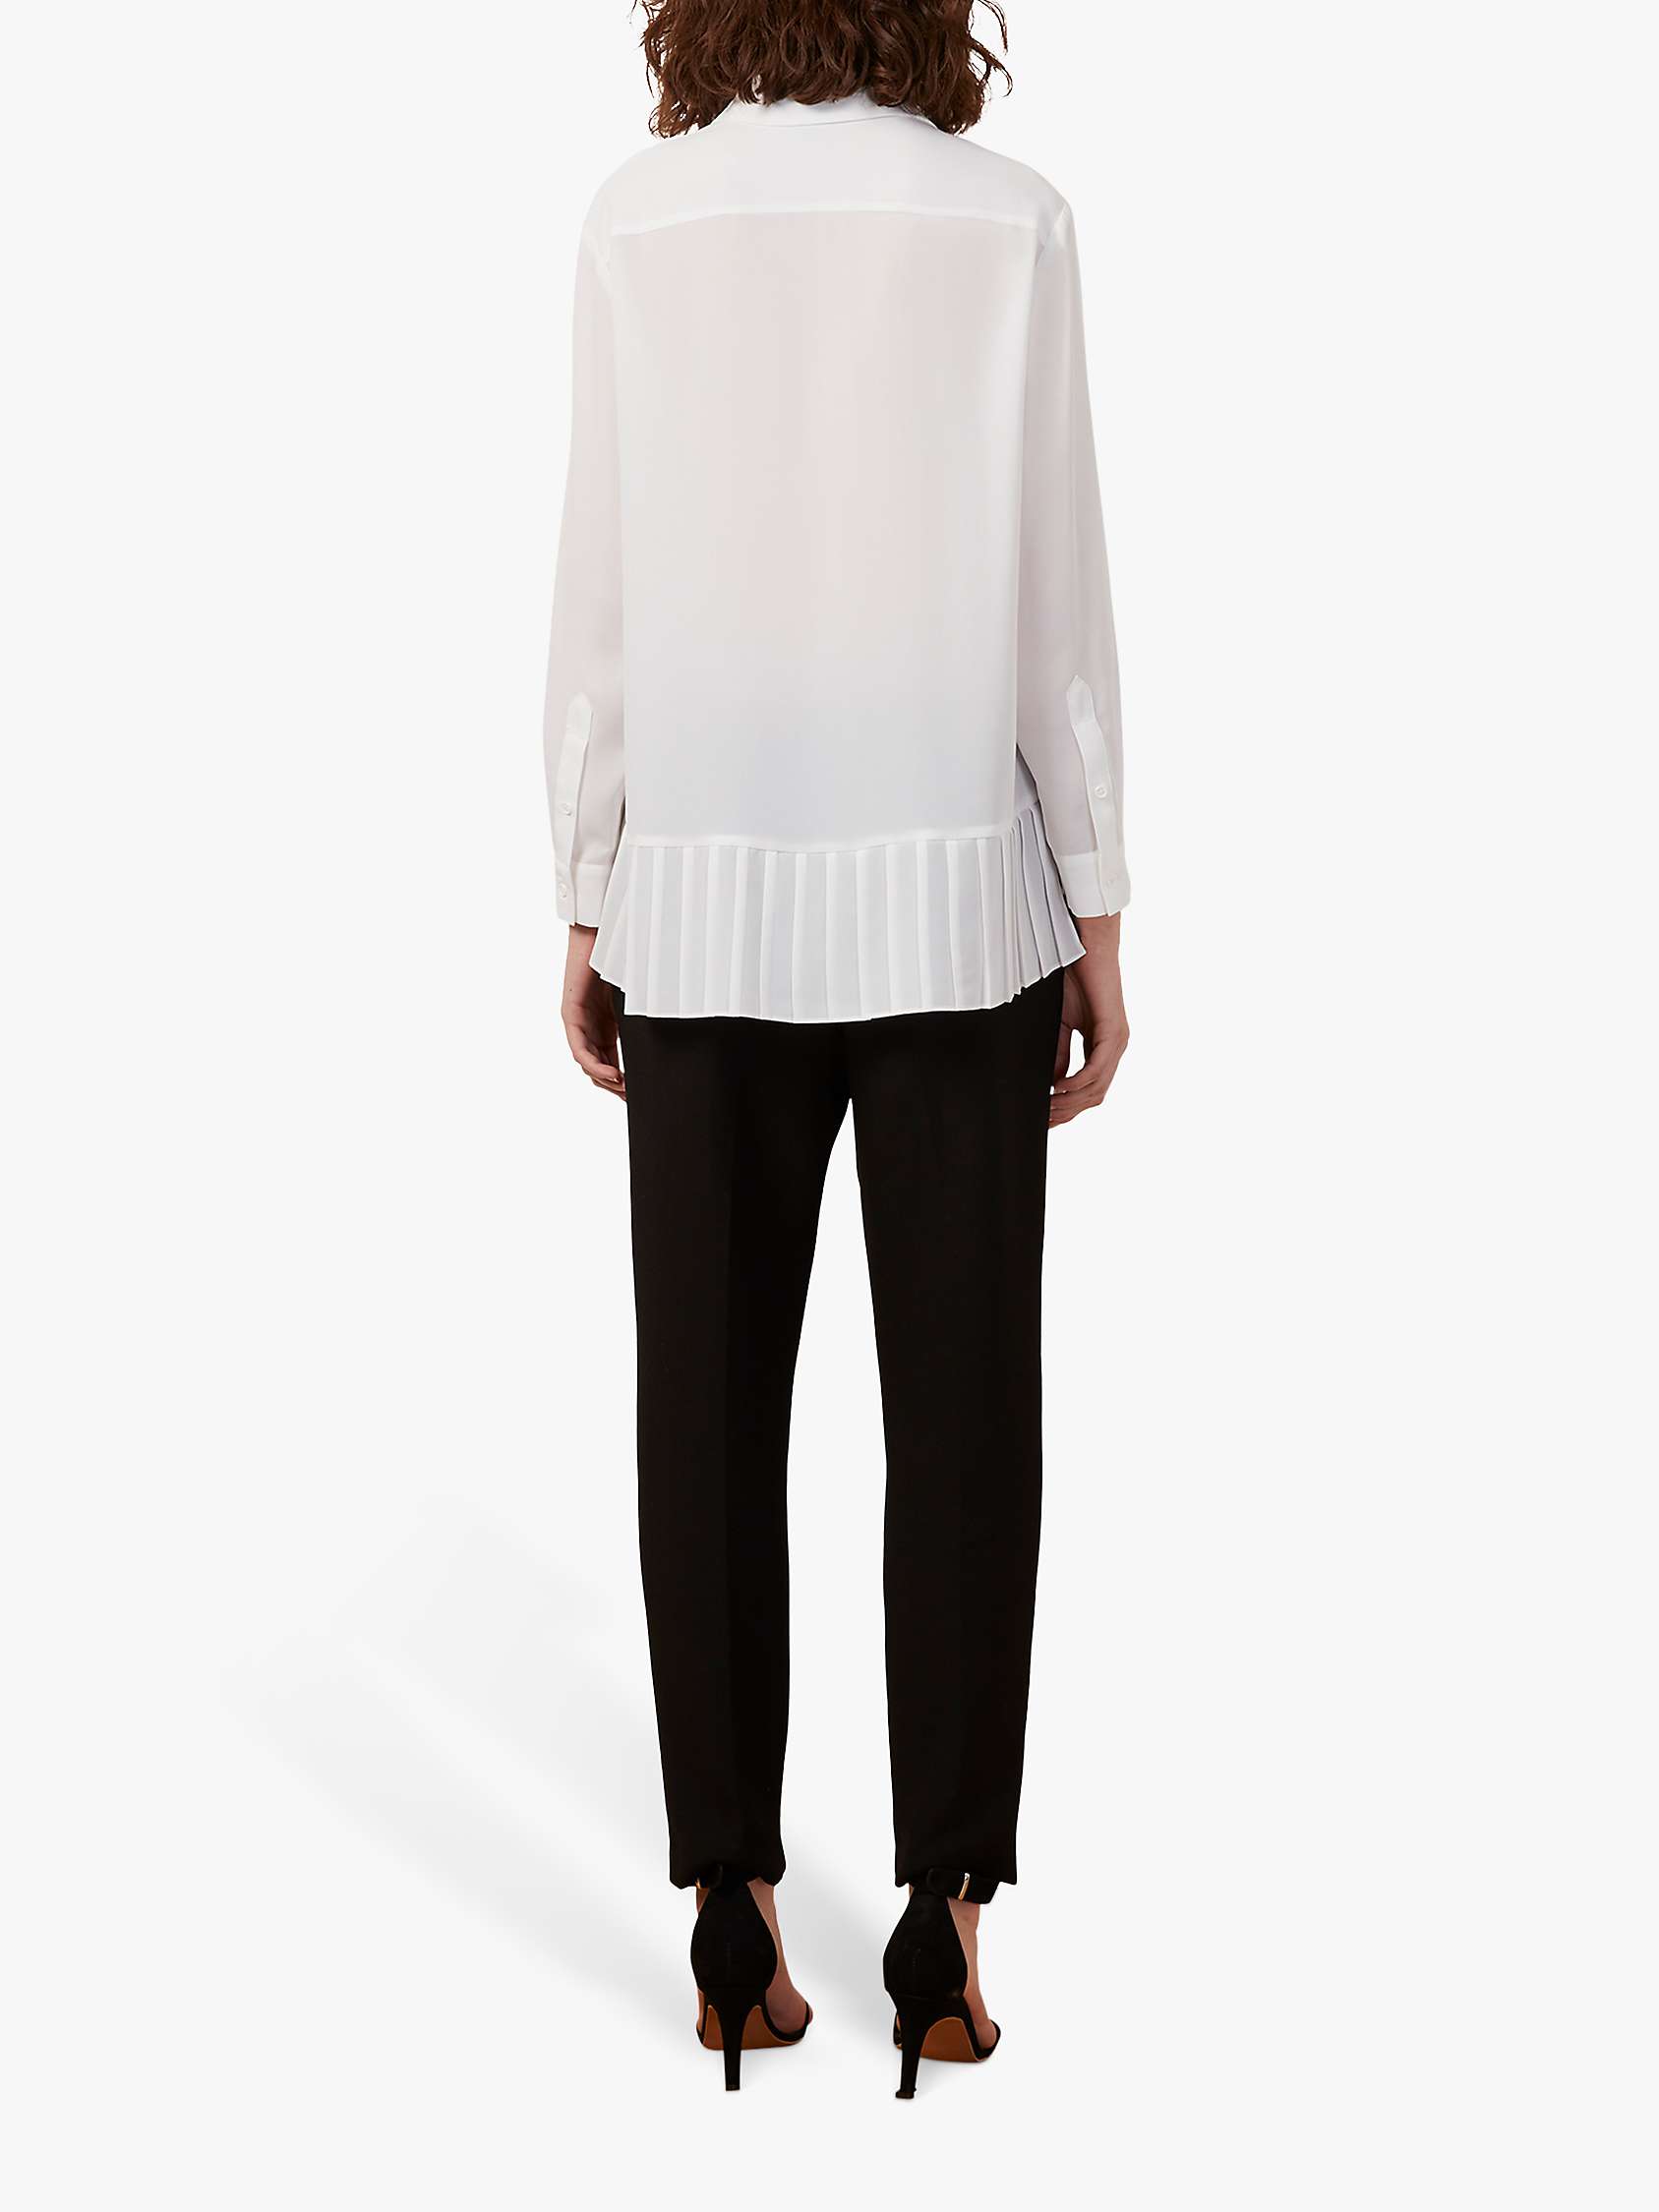 Buy French Connection Crepe Pleat Shirt Online at johnlewis.com